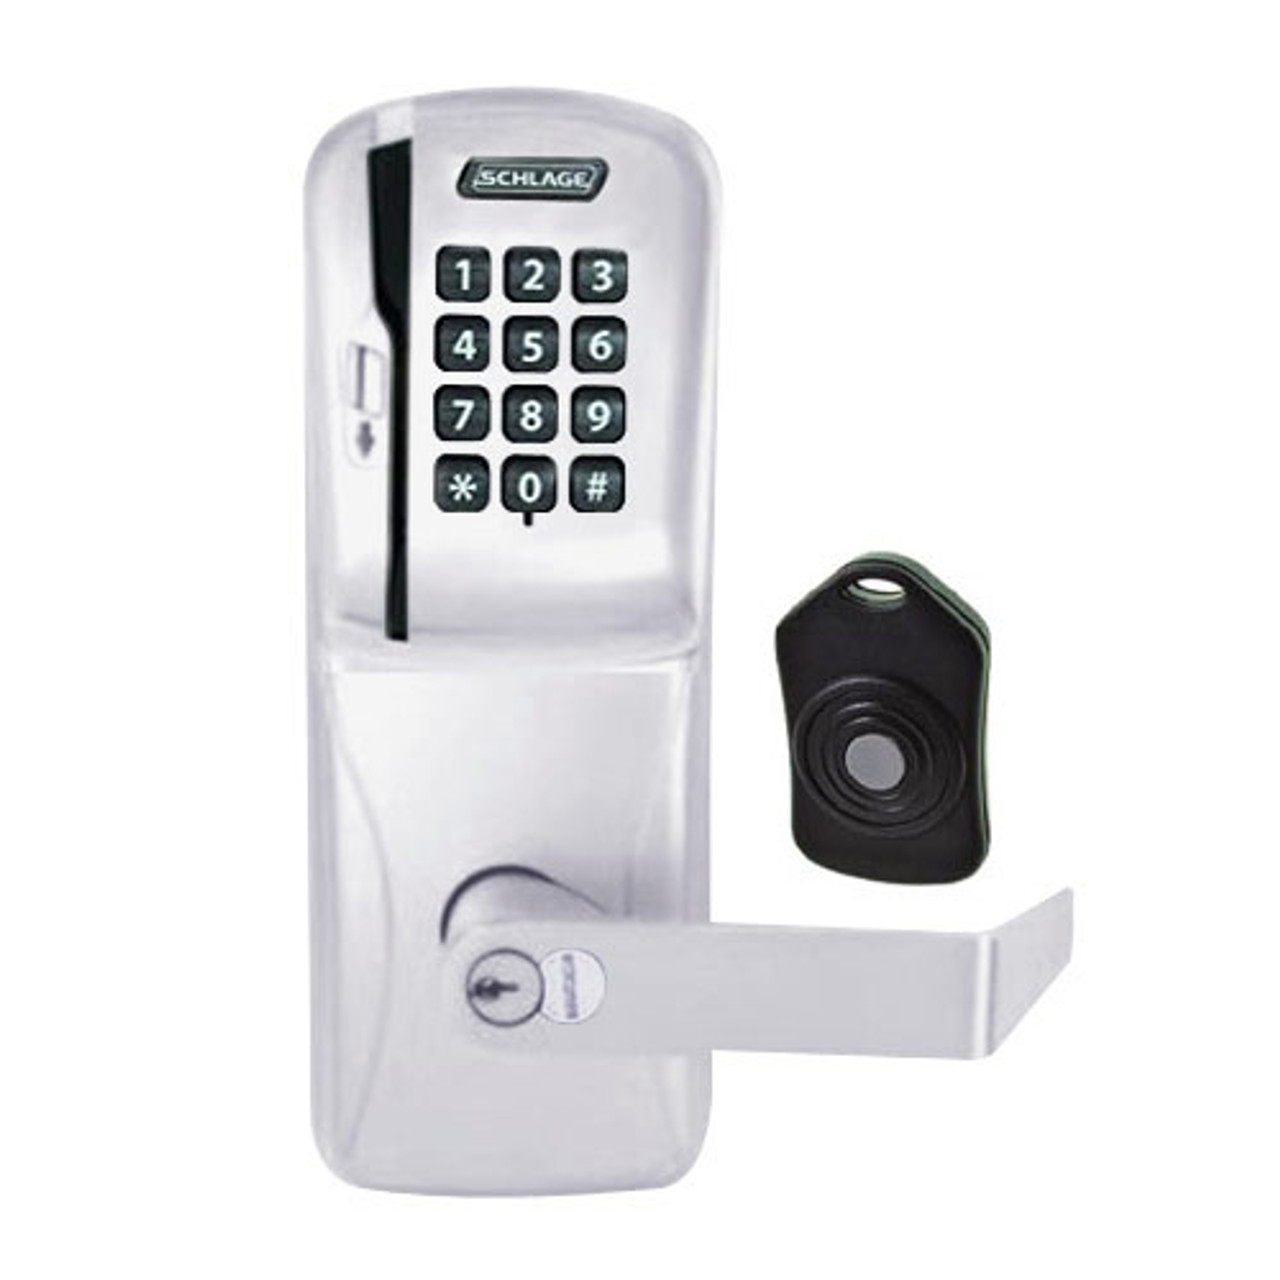 CO220-MS-75-MSK-RHO-RD-626 Schlage Standalone Classroom Lockdown Solution Mortise Swipe Keypad Lock with in Satin Chrome